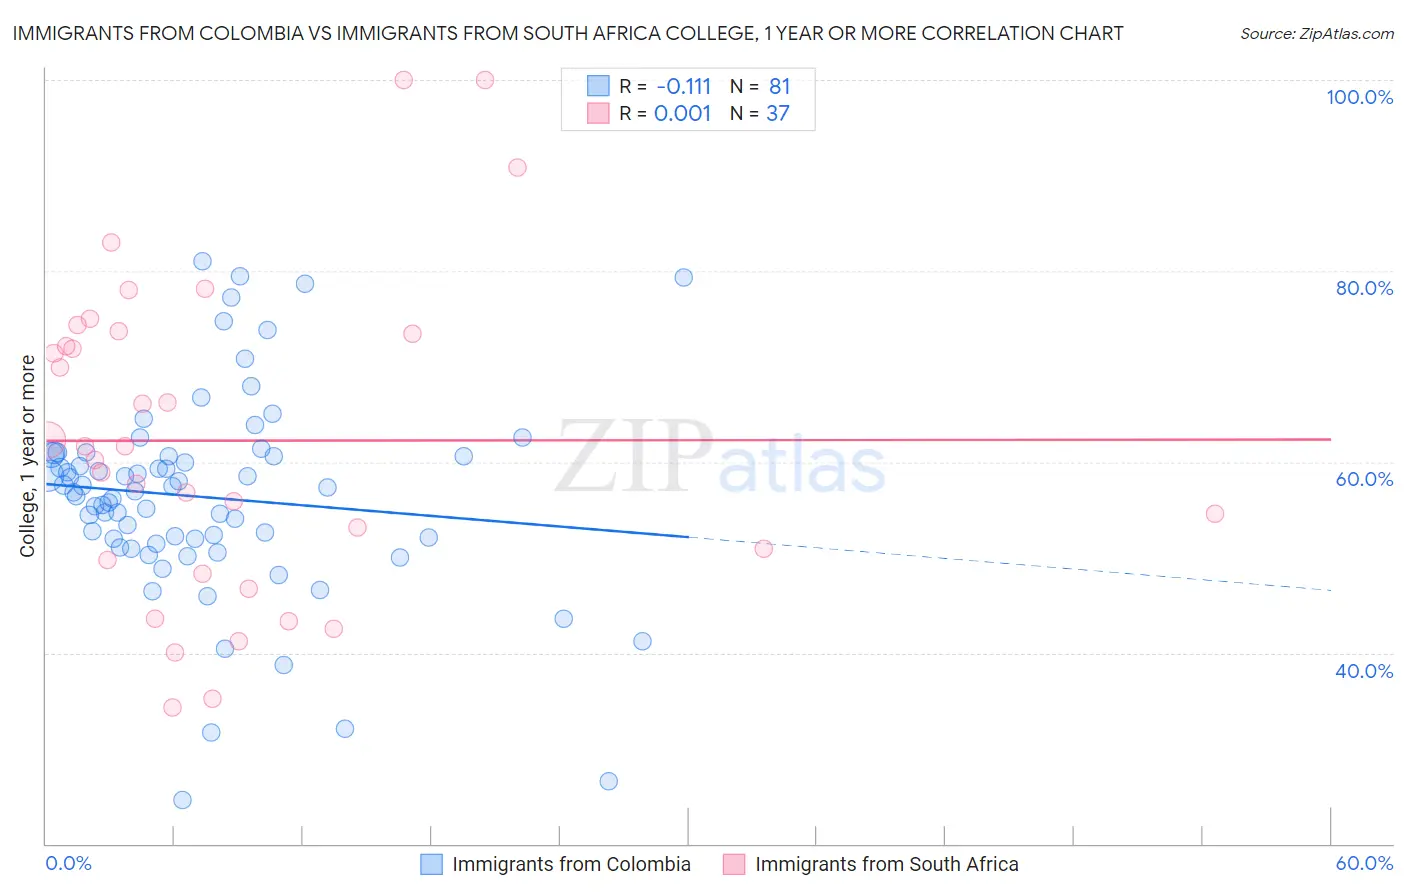 Immigrants from Colombia vs Immigrants from South Africa College, 1 year or more